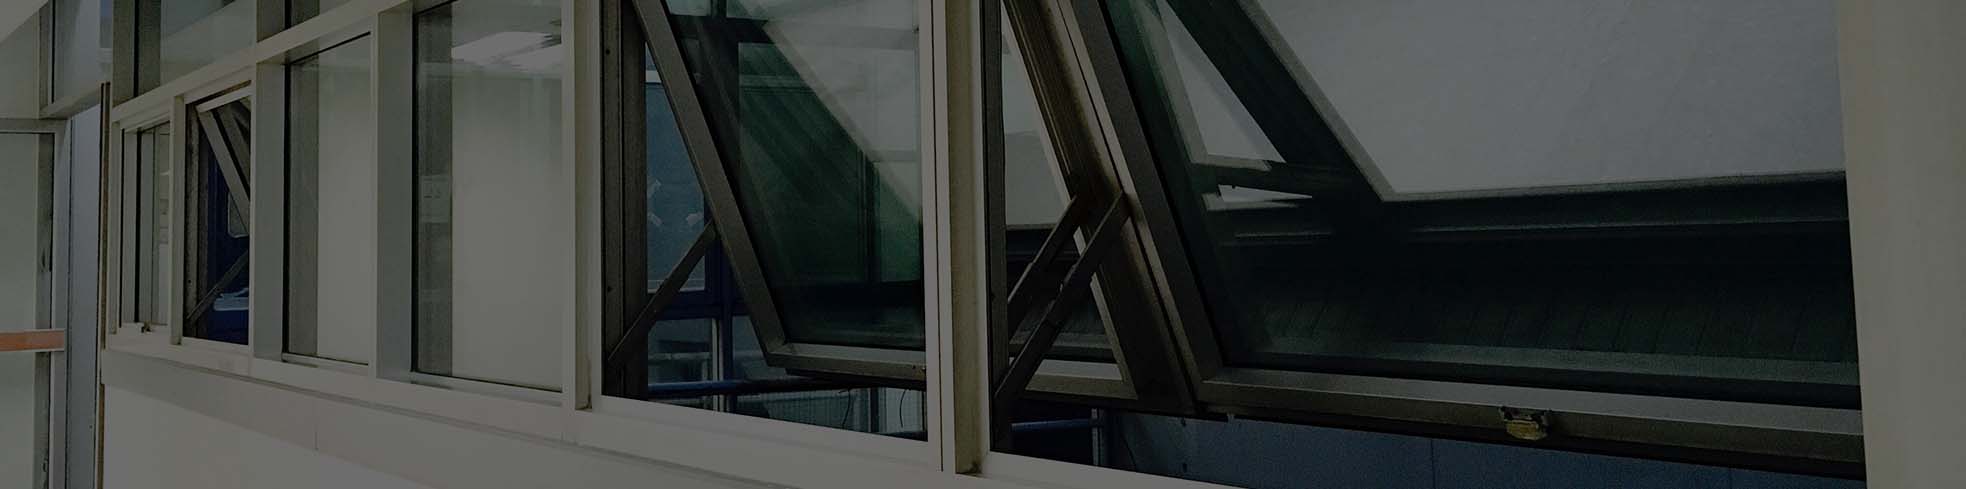 Expert installation for high quality, energy efficient windows 